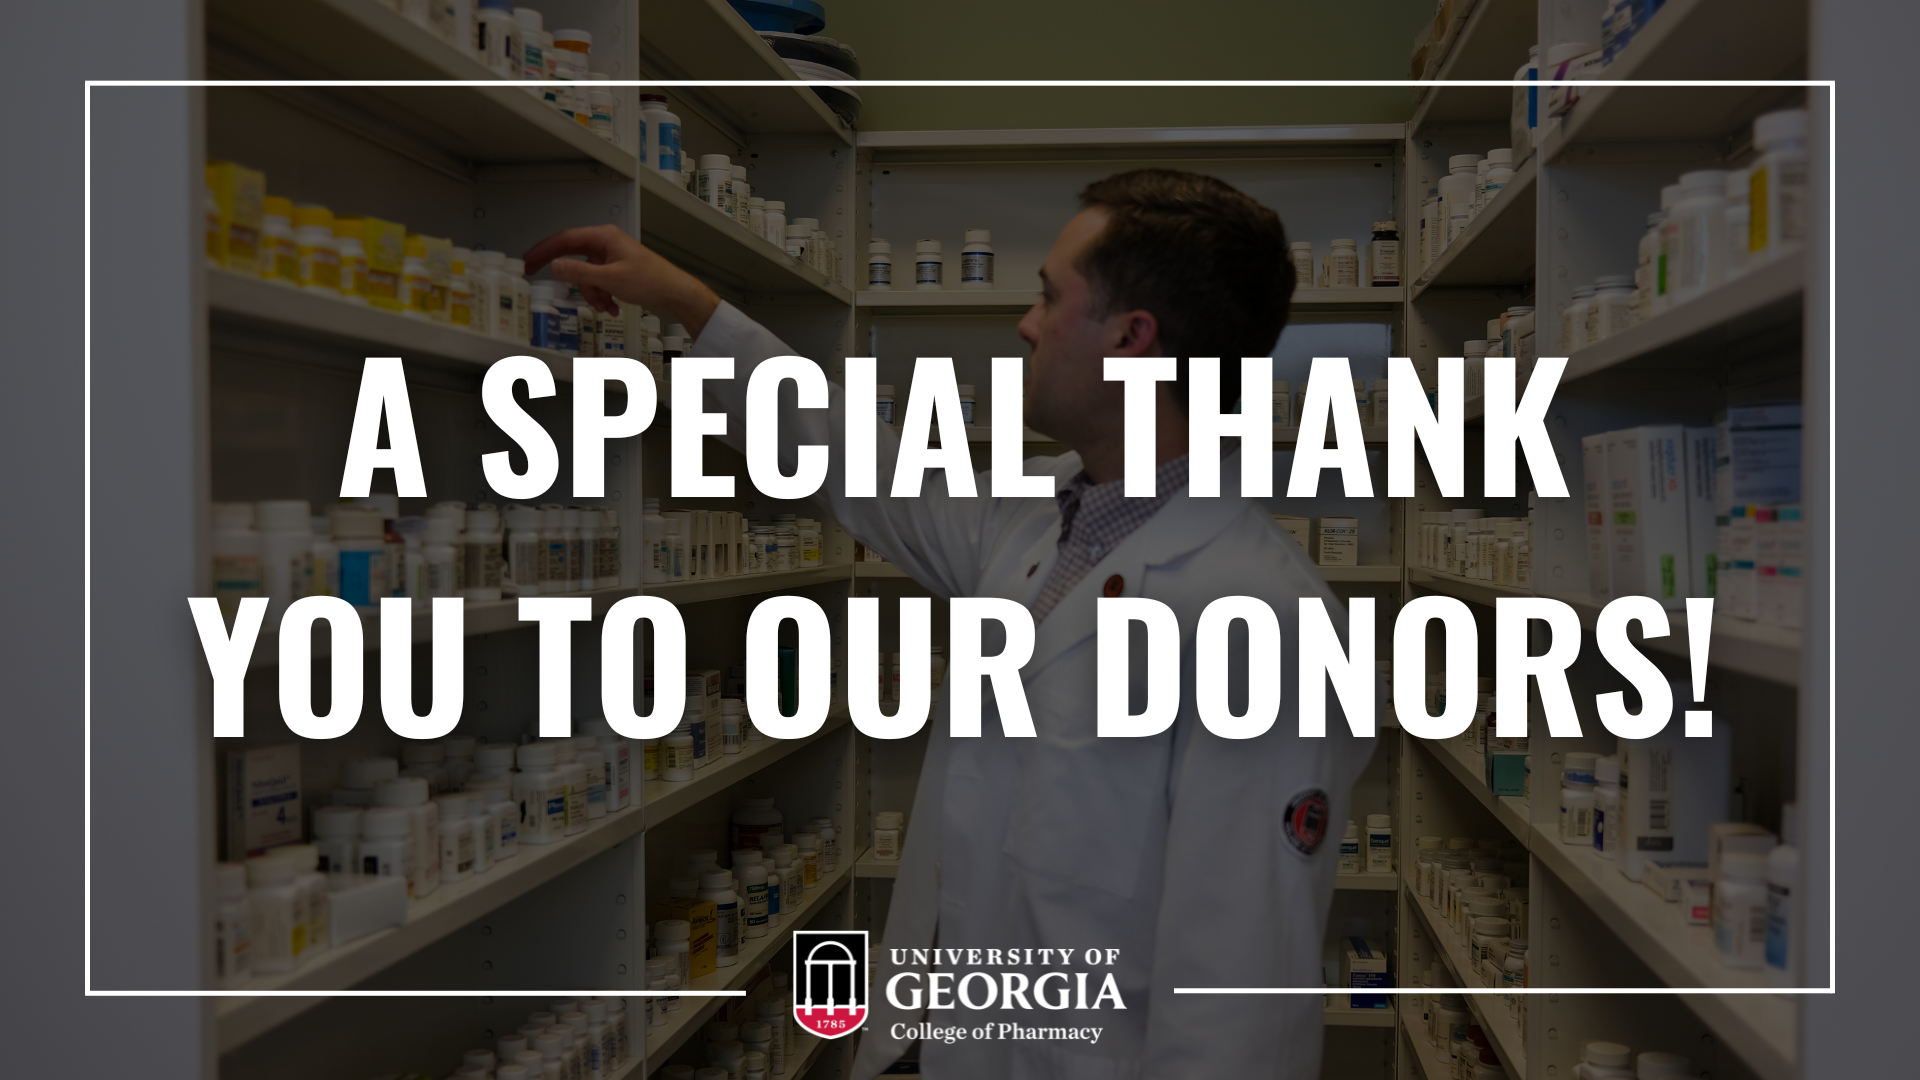 We Appreciate Our Donors!